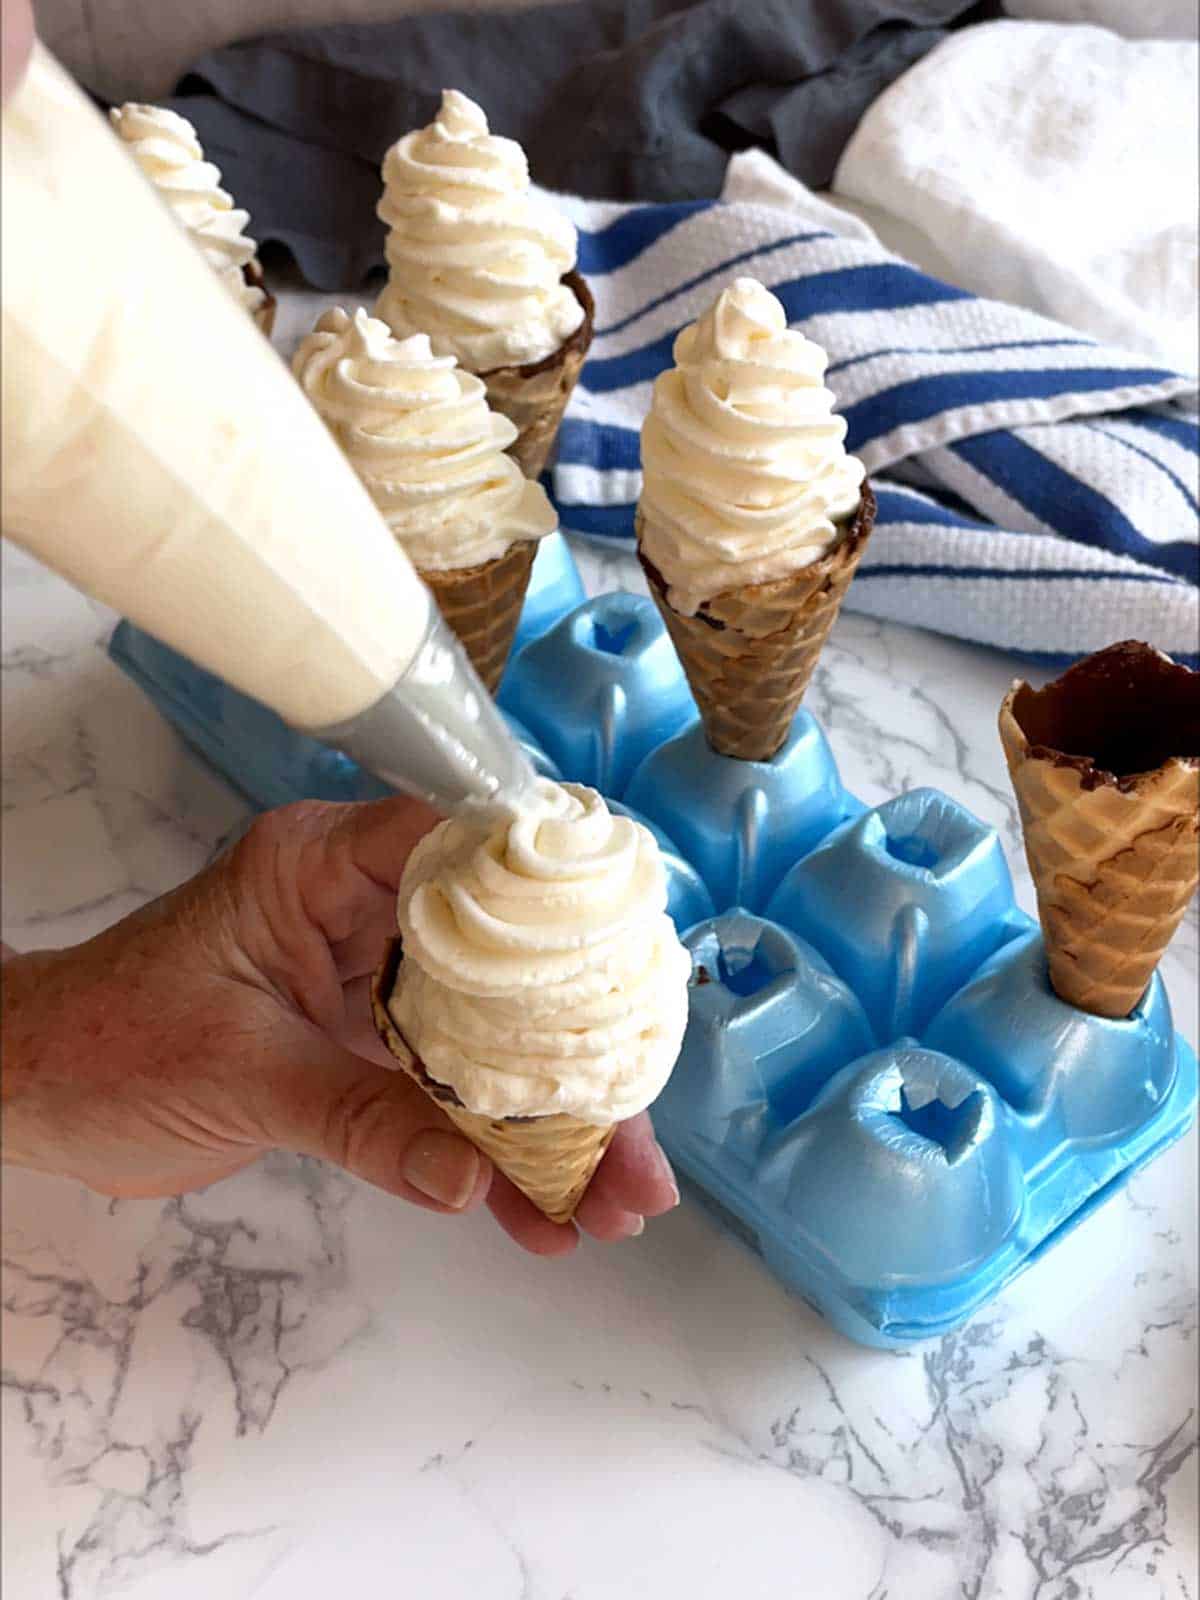 Piping the ice cream into the coated cones.